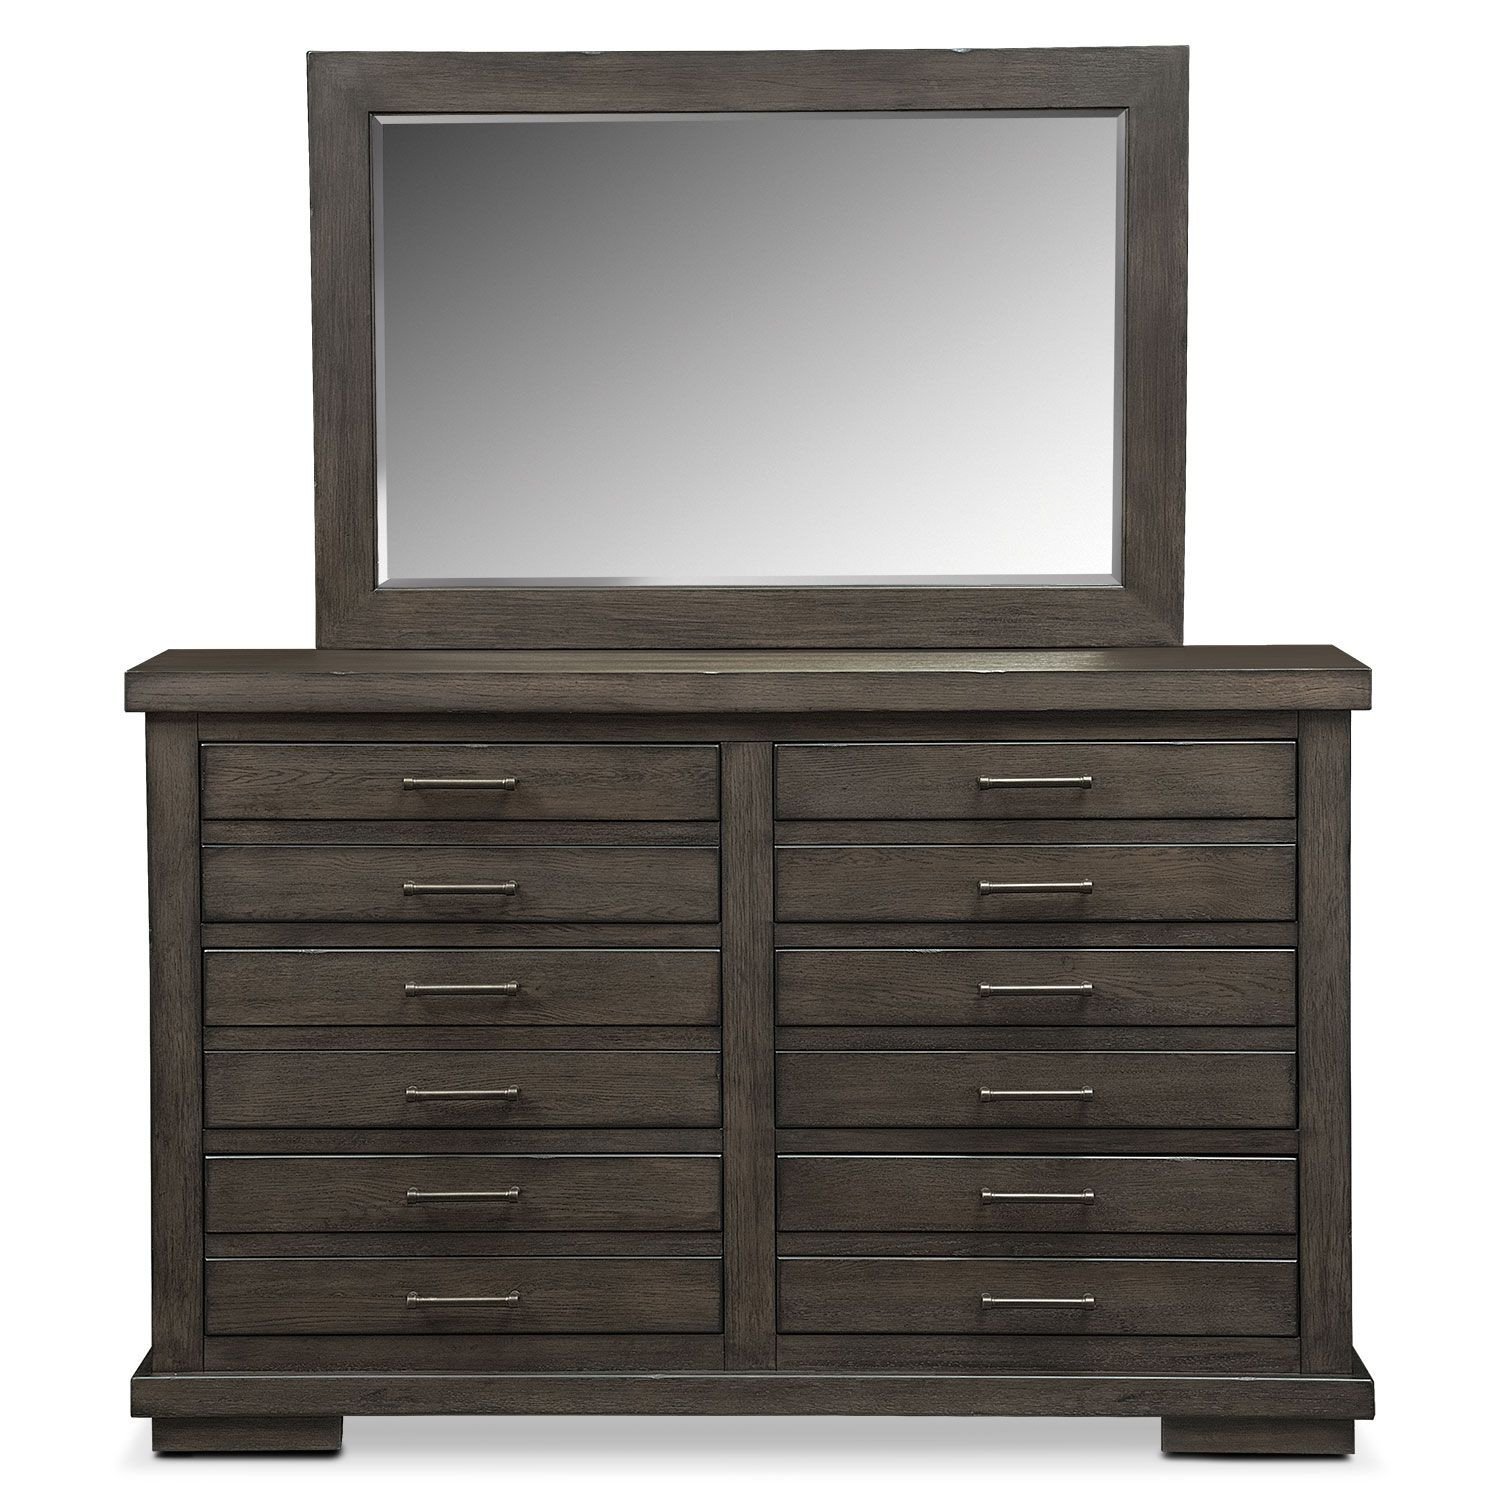 Industrial Style Bedroom Furniture Inspirational Jamestown Dresser and Mirror Sable